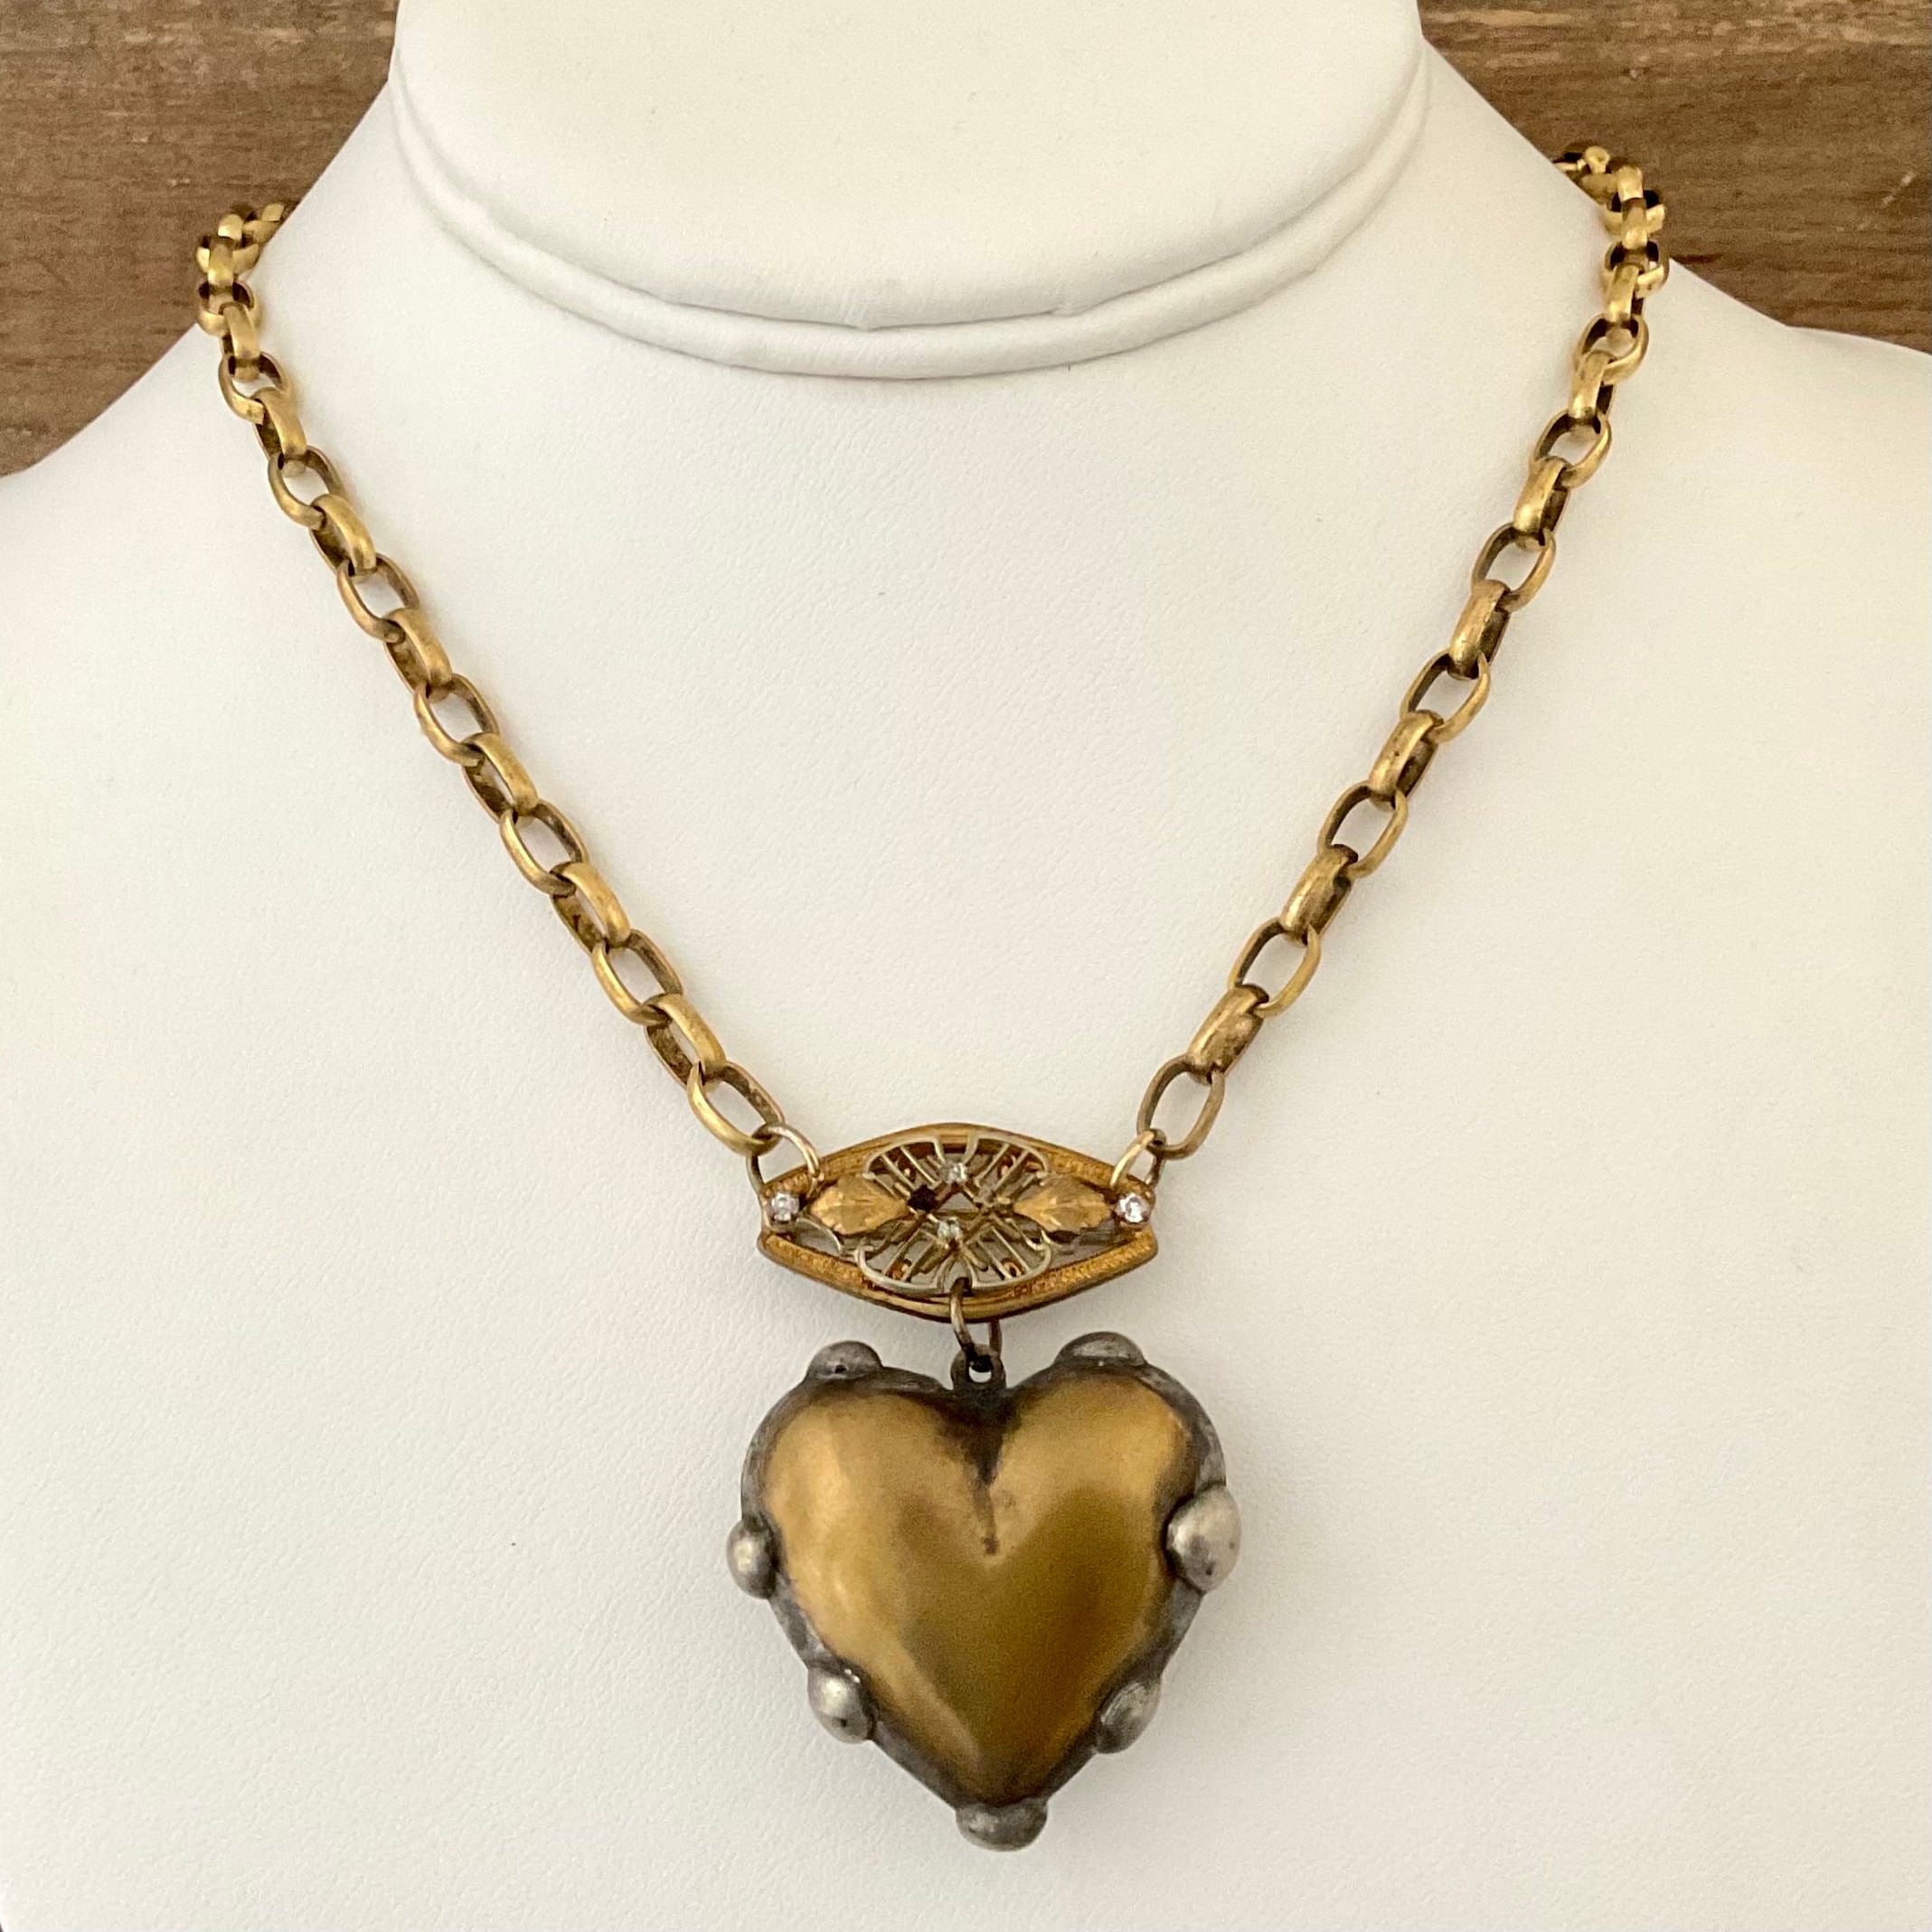 Vintage Chain with Vintage Connector & Soldered Heart 16"